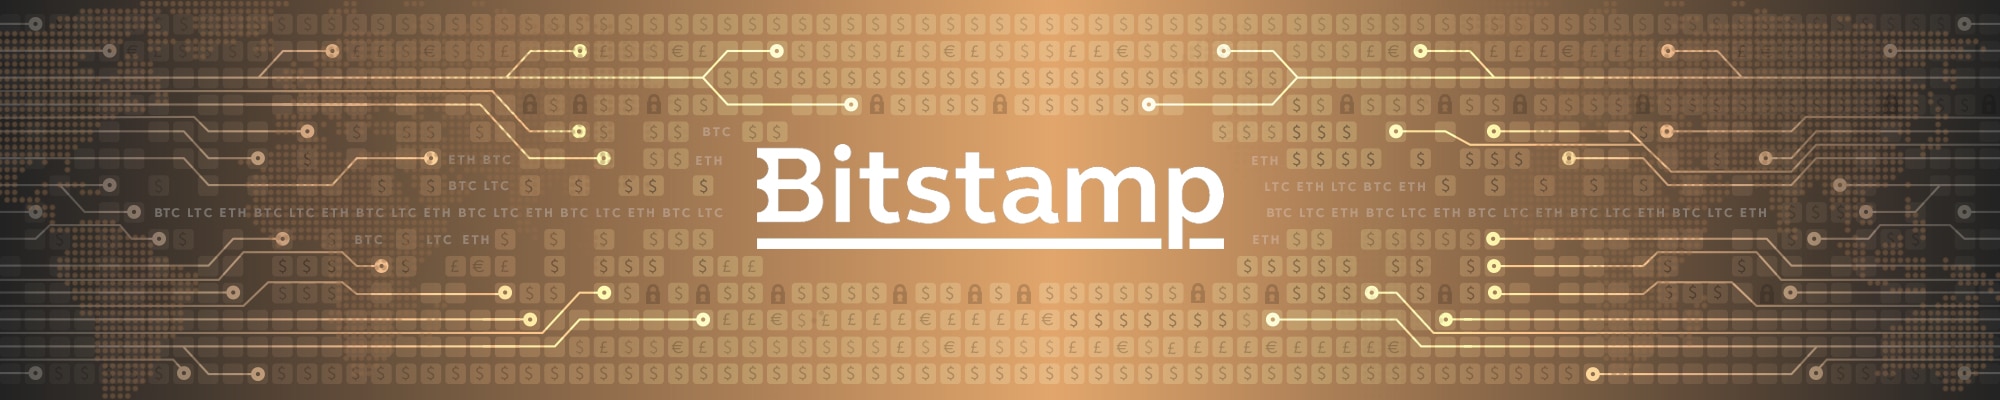 withdraw money from bitstamp to pounds